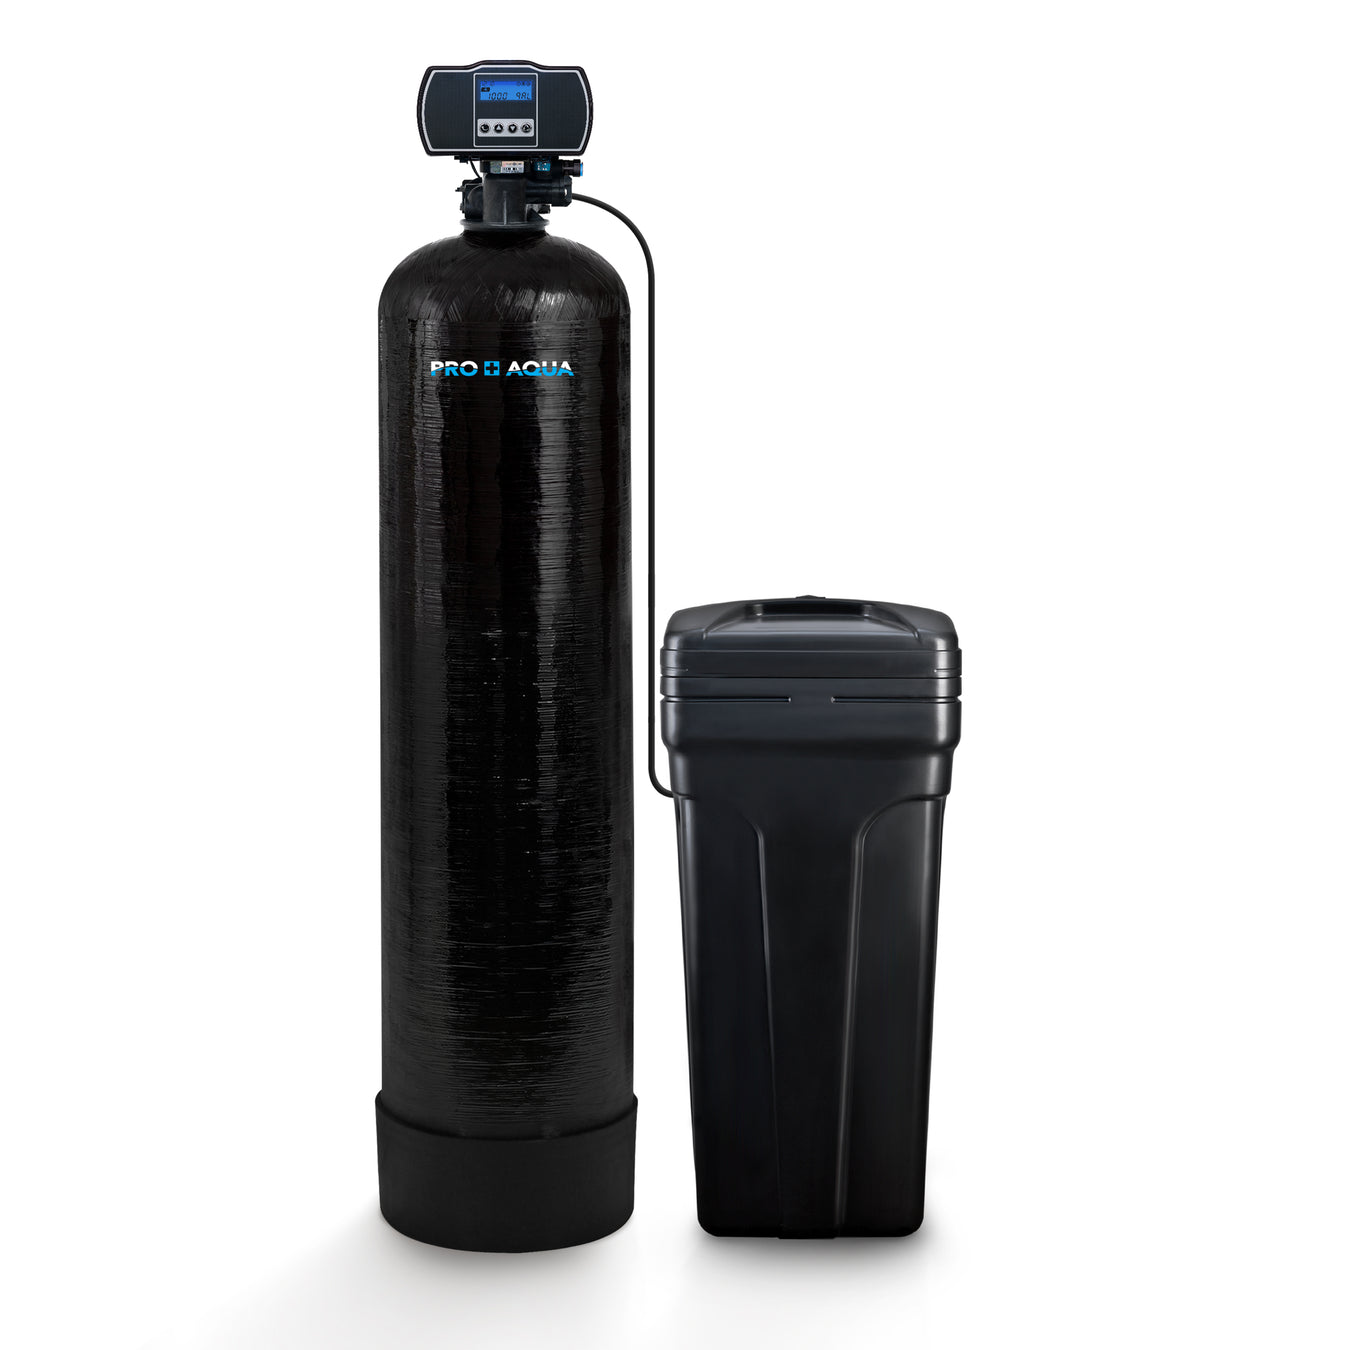 Whole House Water Softeners